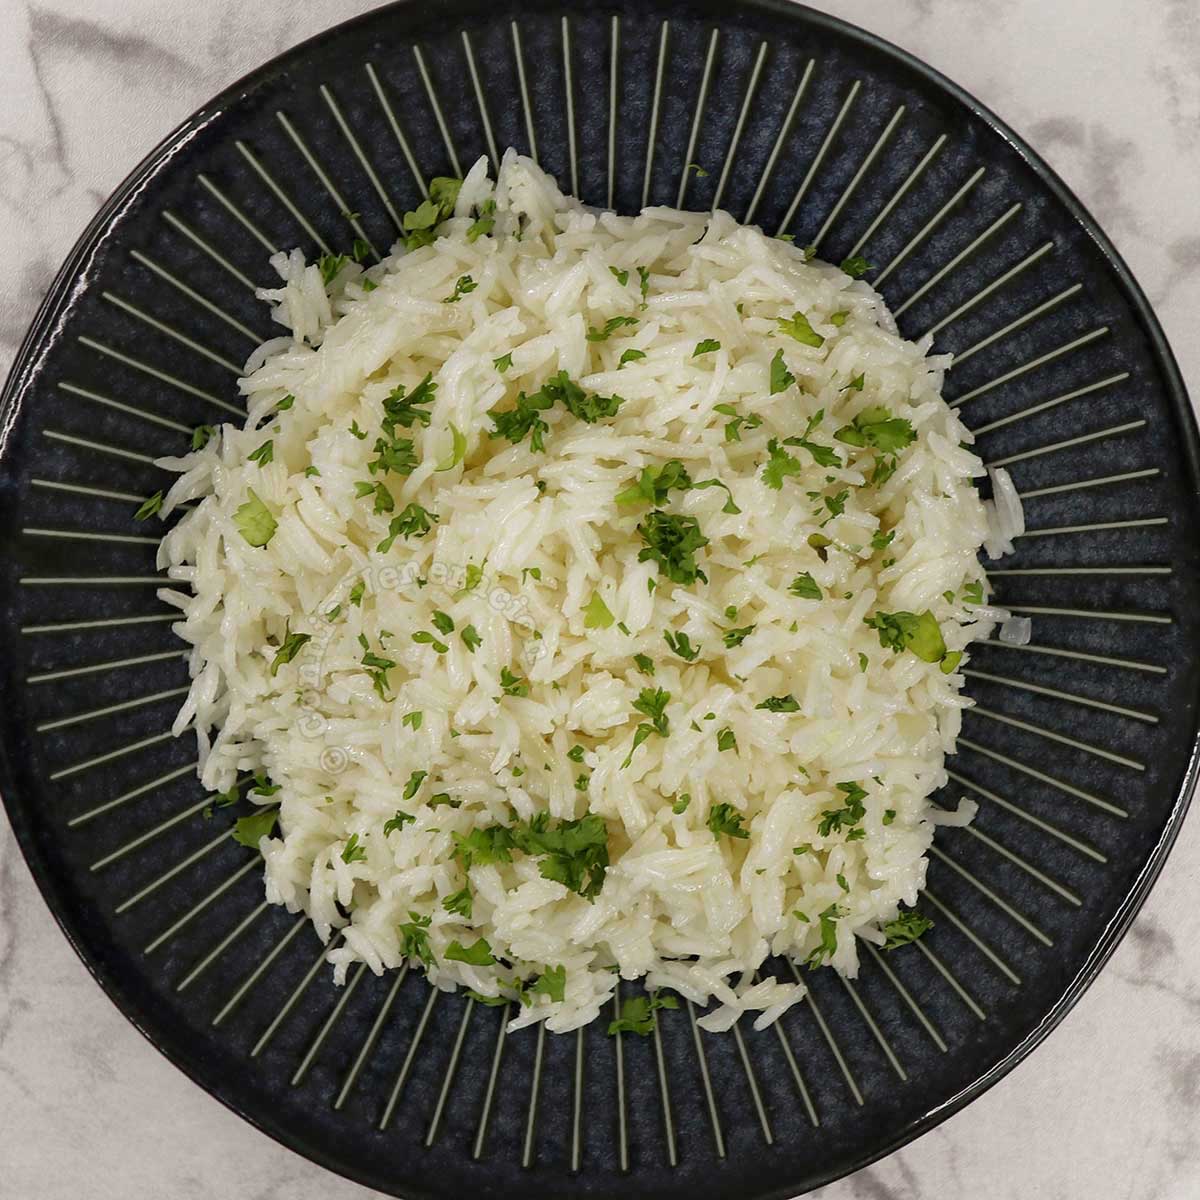 Mexican-style white rice